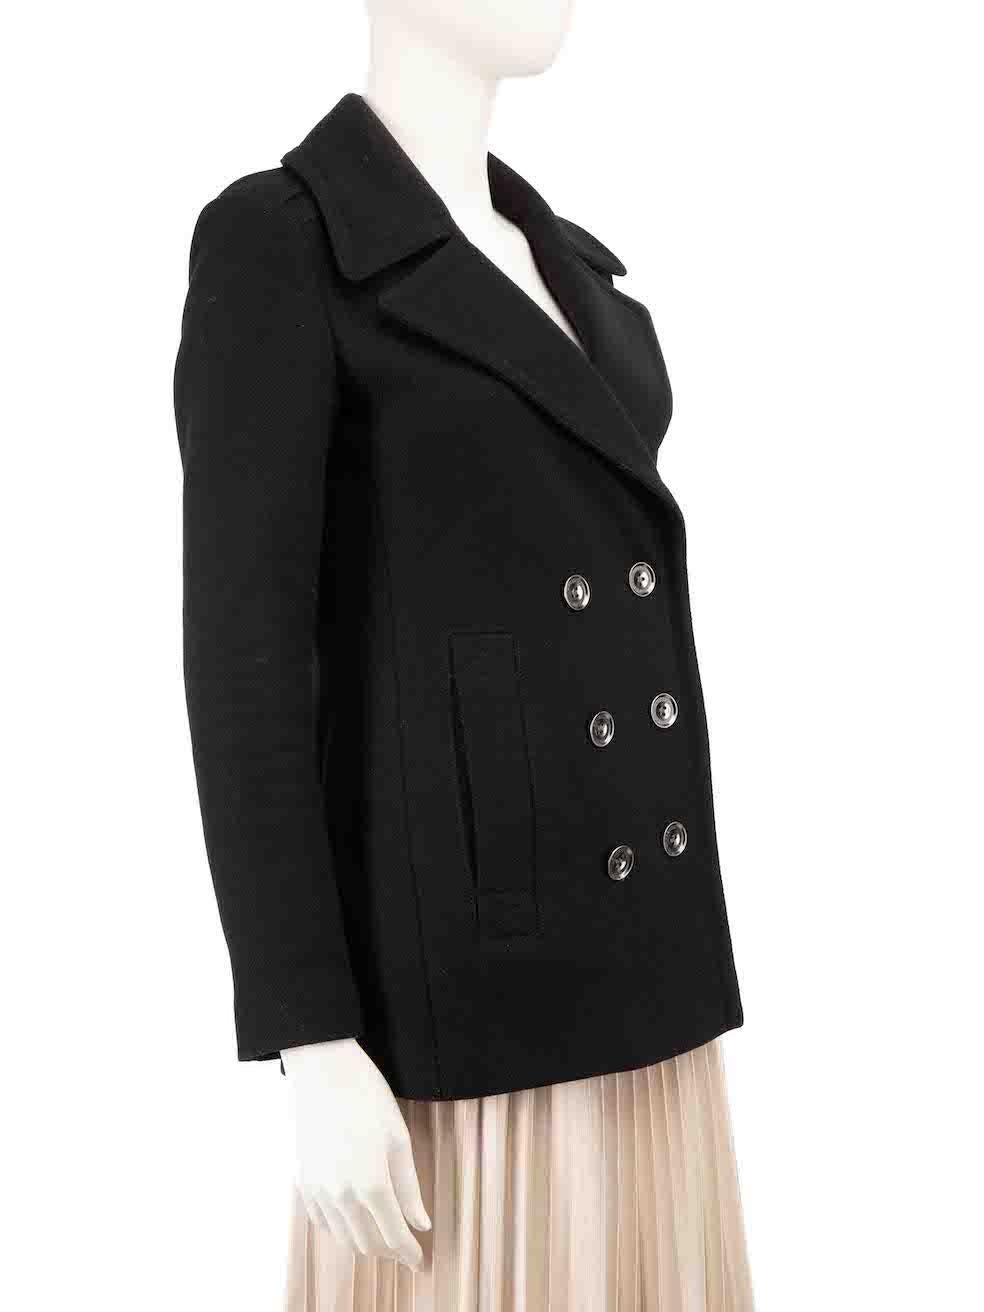 CONDITION is Very good. Hardly any visible wear to jacket is evident on this used Burberry Brit designer resale item.
 
 Details
 Black
 Wool
 Short length coat
 Double breasted
 2x Front side pockets
 Collared
 
 
 Made in Bosnia
 
 Composition
